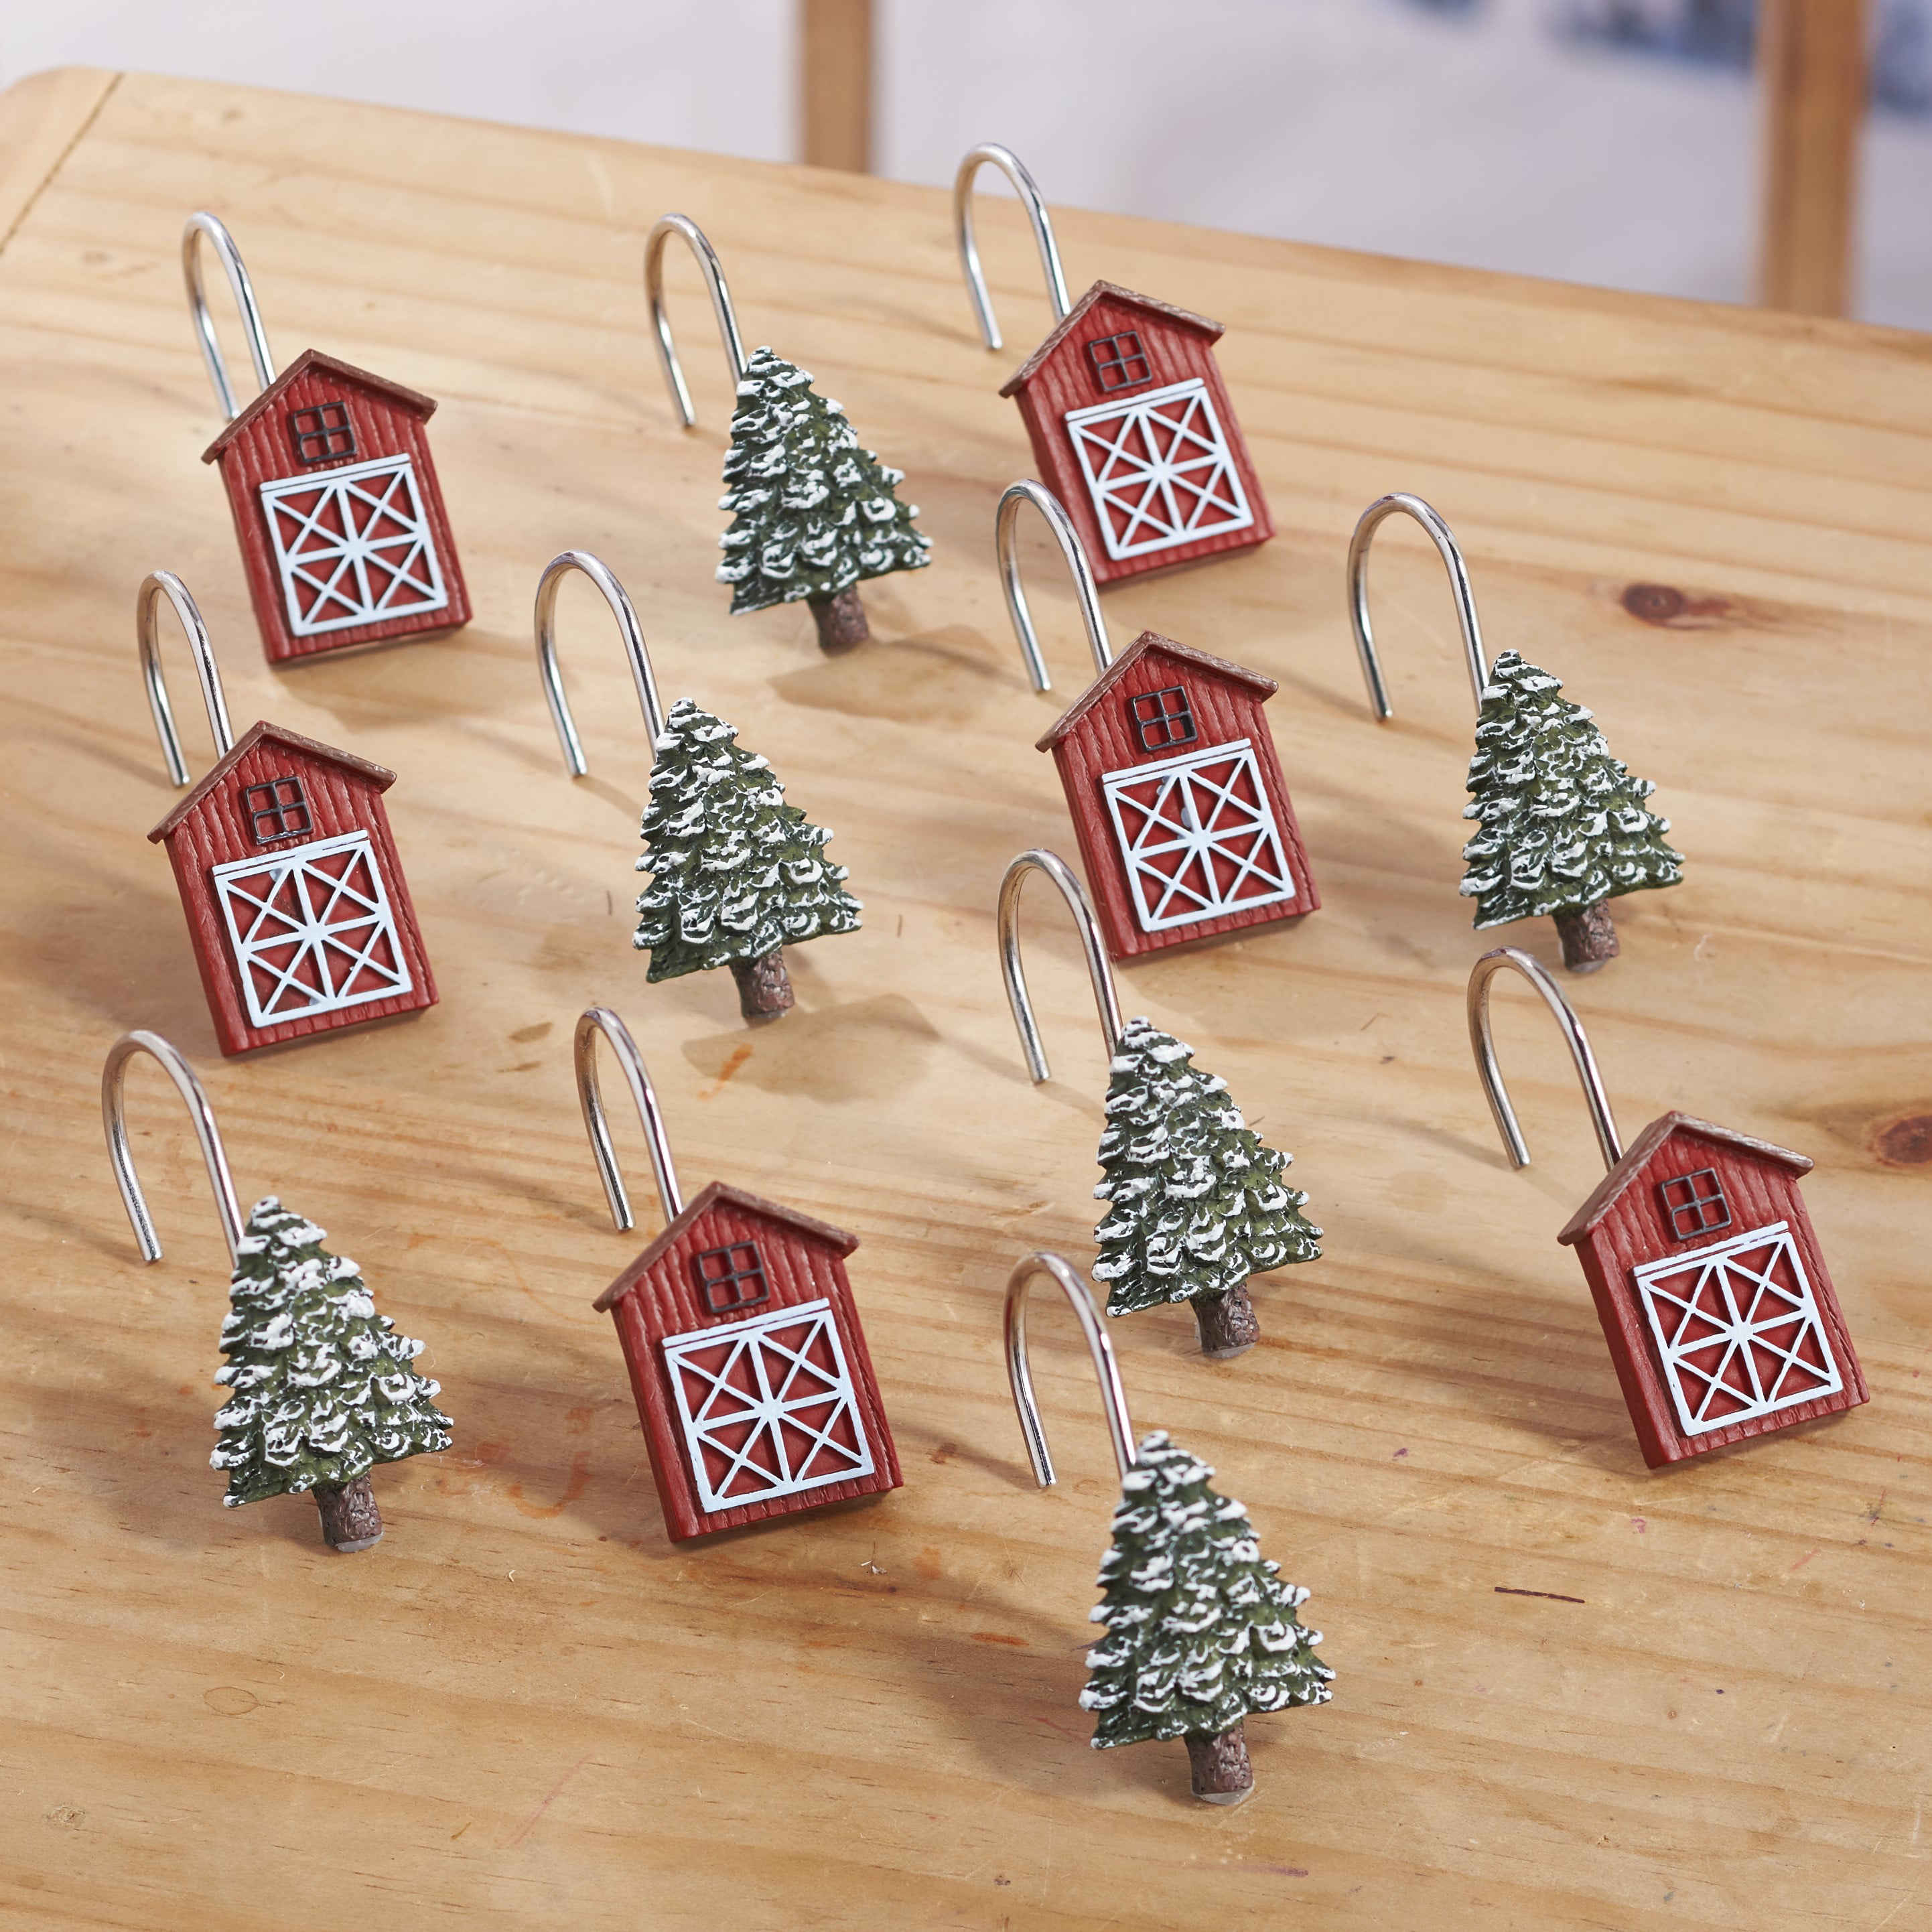 Set of 12 Vintage Red Truck Christmas Tree Outdoor Crystal Glass Shower Curtain Hooks Rings Decorative Bathroom Decor